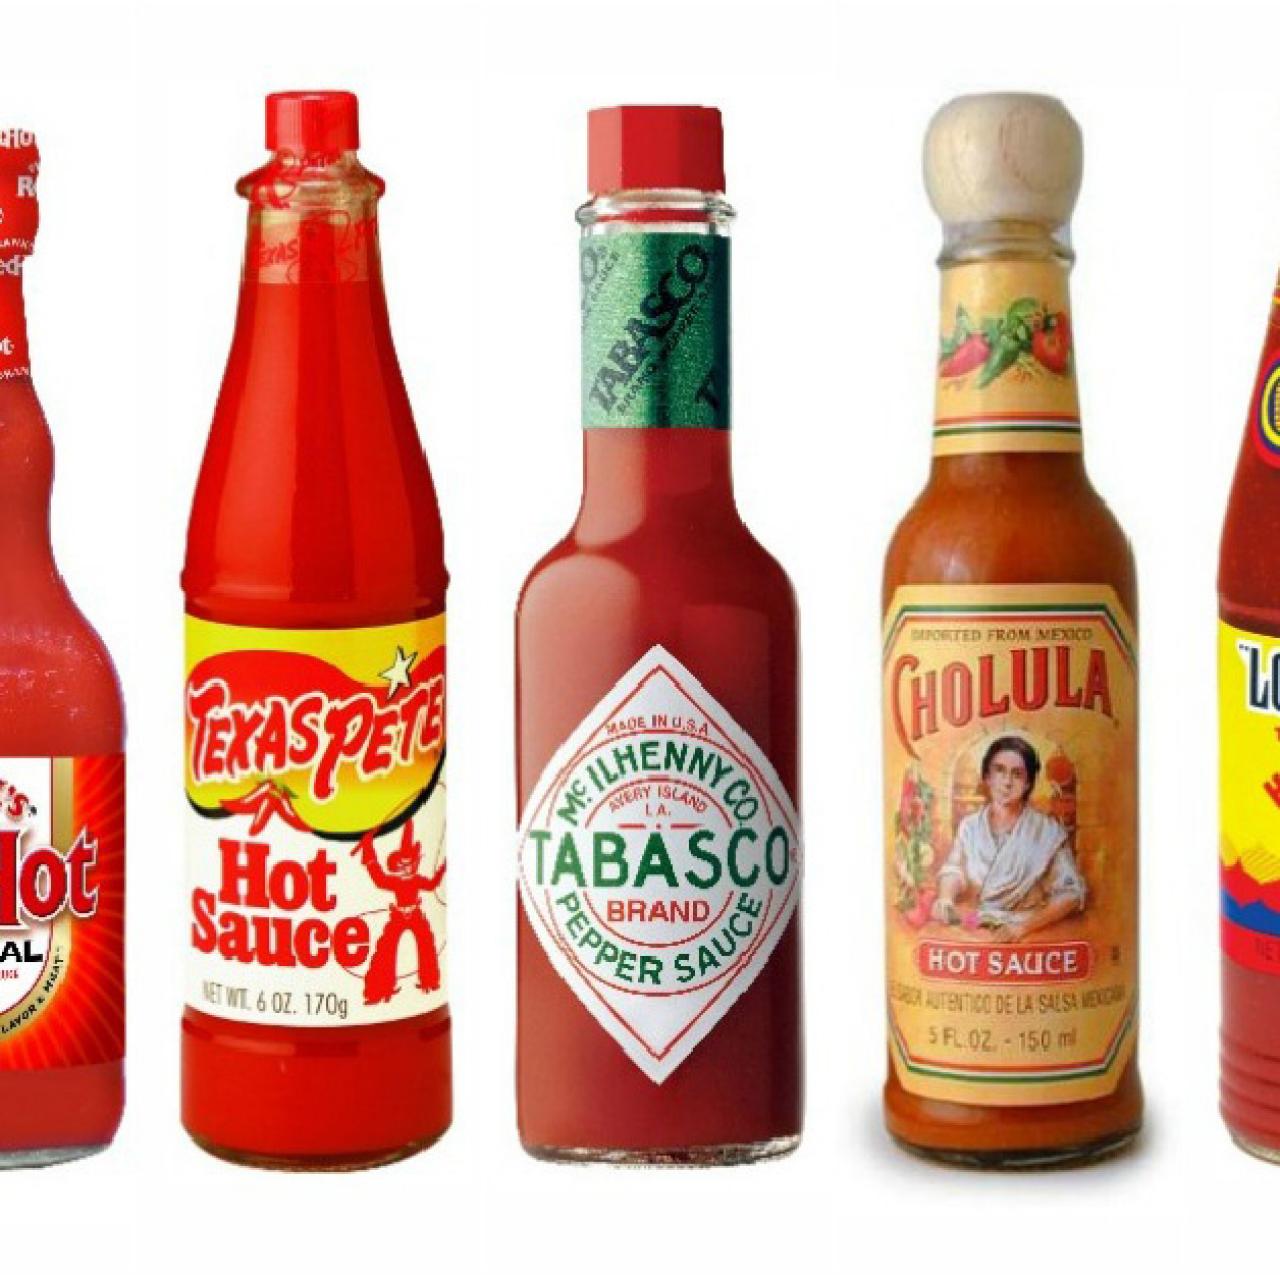 We Ranked 6 Flavors of Tabasco Hot Sauce From Best to Worst